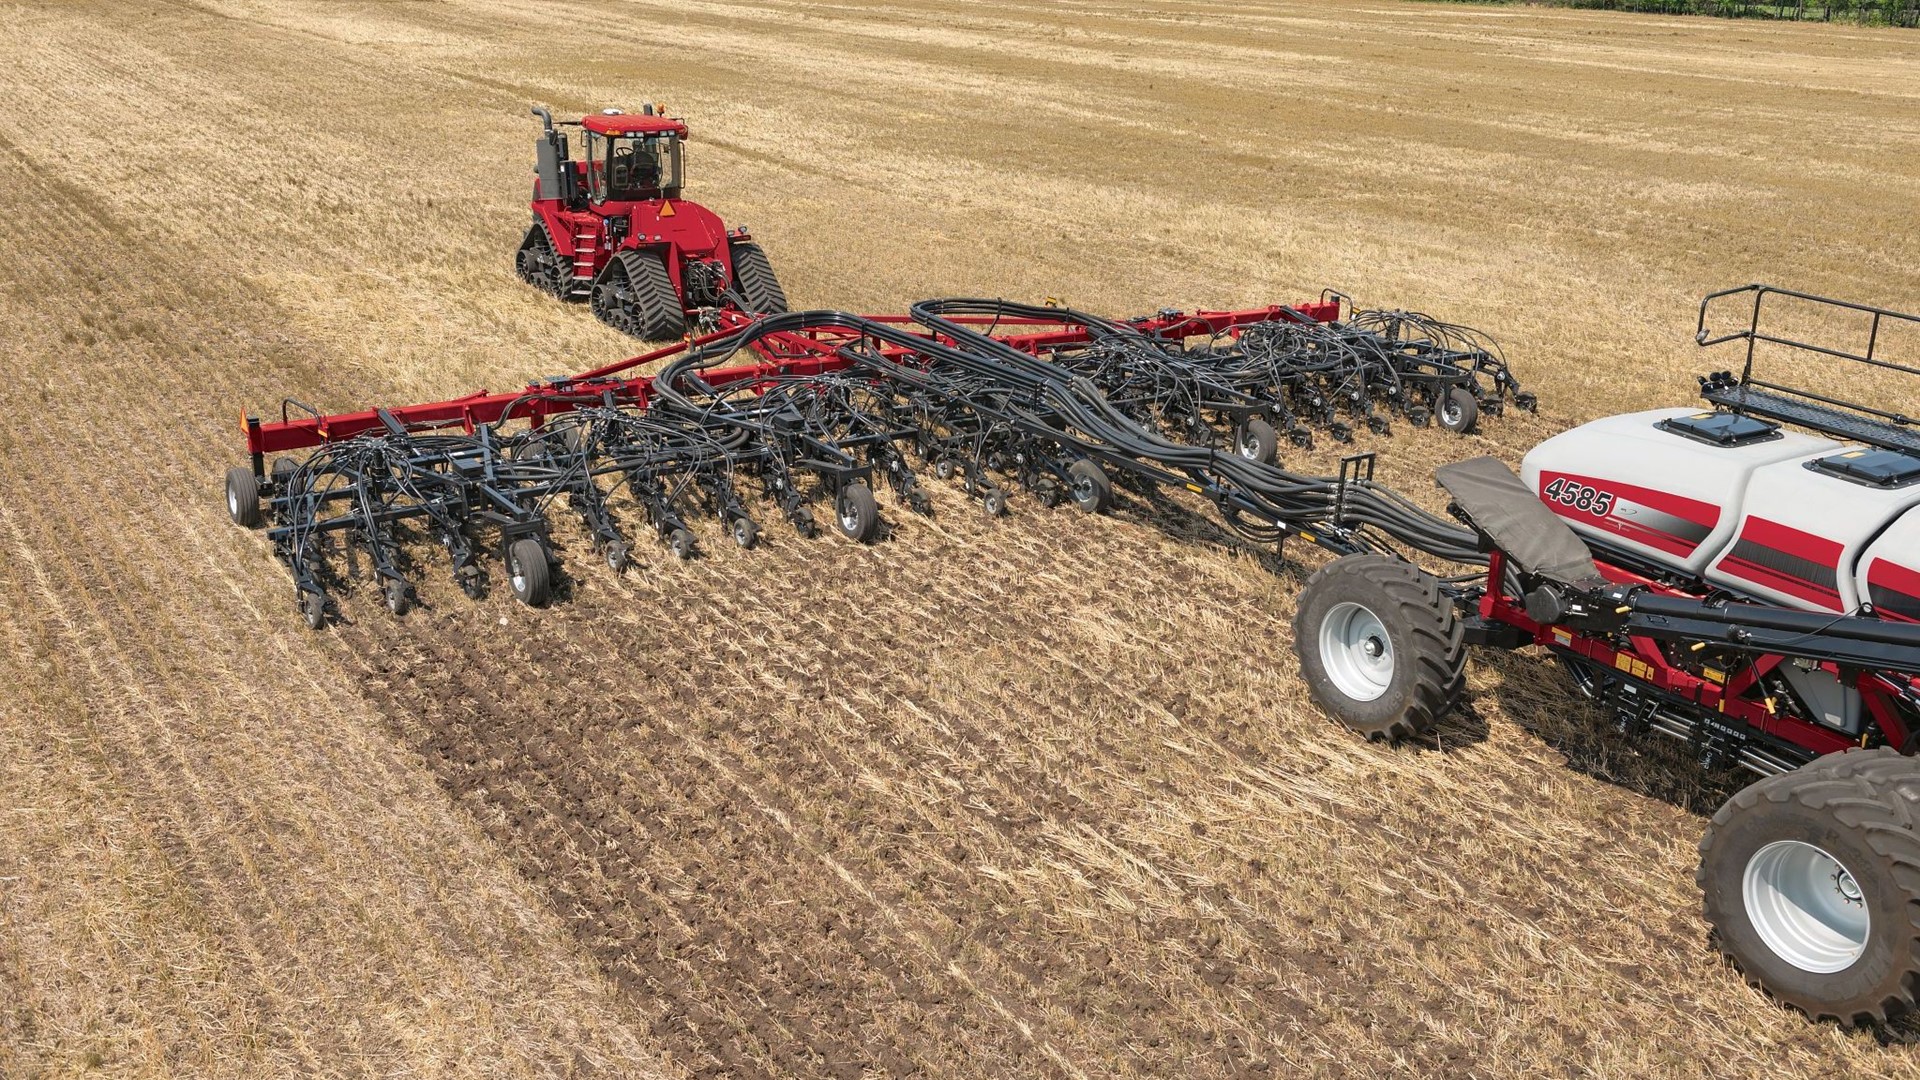 New Precision Air 5 Series air cart and Flex Hoe 900 air drill features help producers cover wides area efficiently.